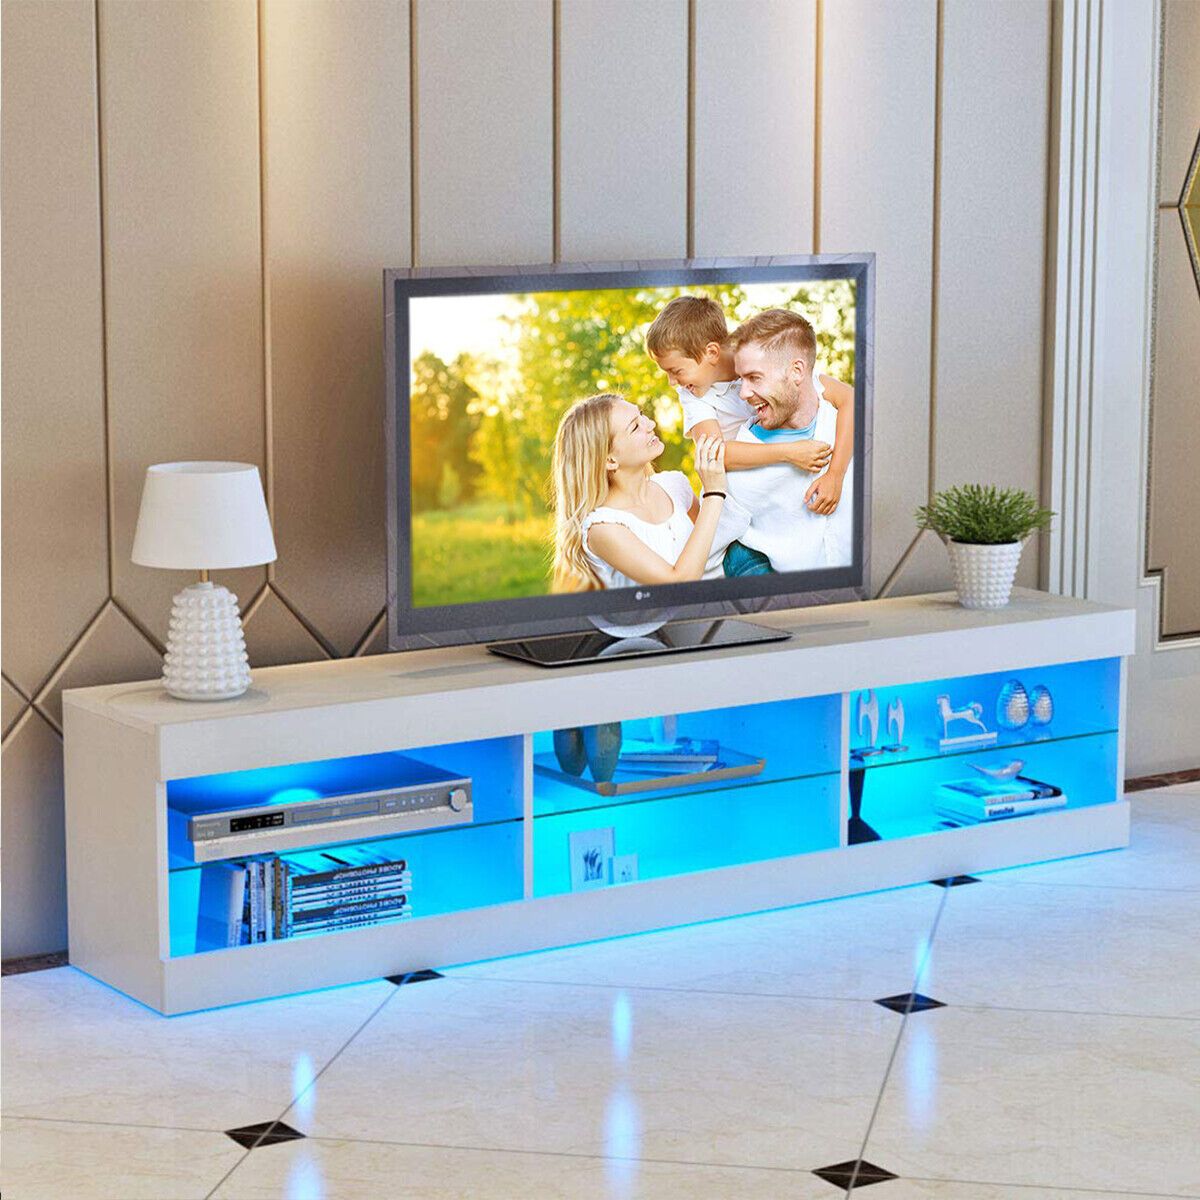 Rgb Led Tv Stand Entertainment Center For 65 70 Inch Tv High Gloss Glass  Shelves | Ebay With Regard To Rgb Tv Entertainment Centers (View 8 of 15)